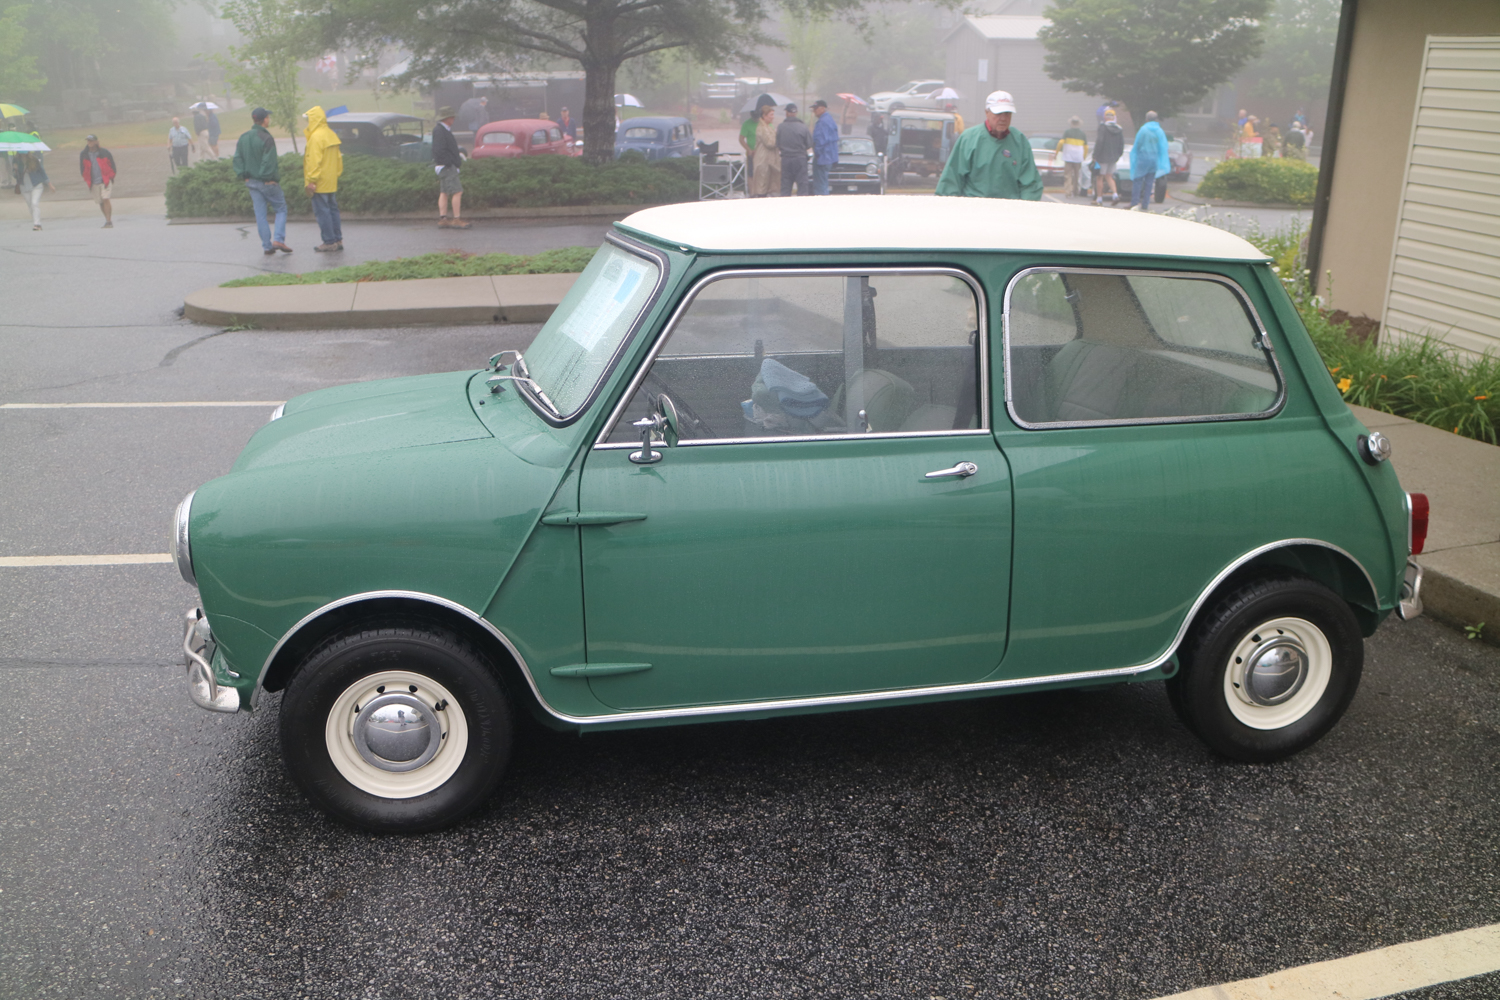 Even in the fog, this Mini looked good.  It won Best in Class, Foreign Sports British against stiff competition.